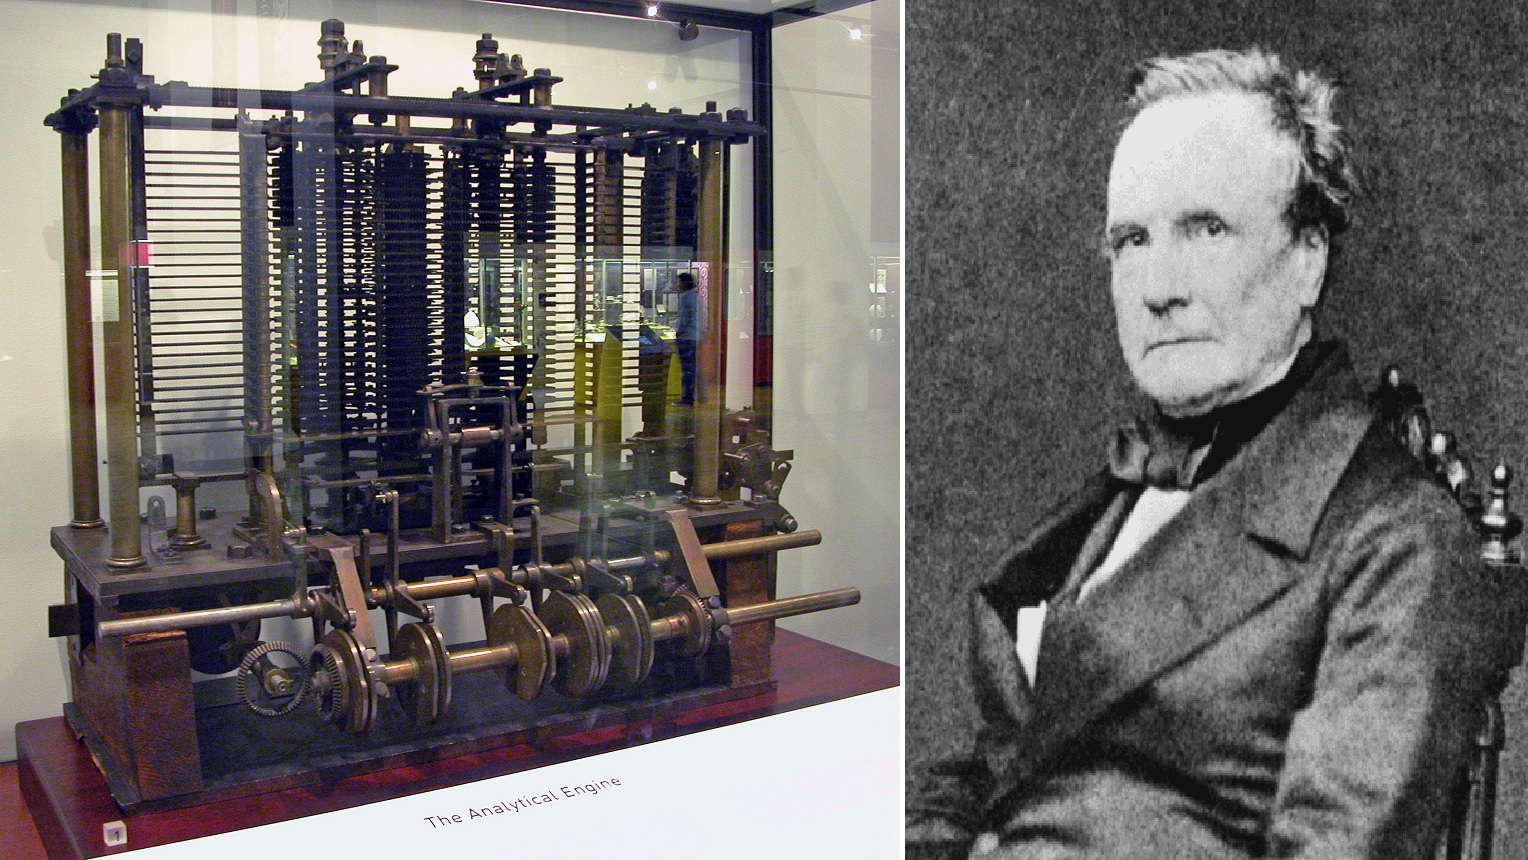 Analytical Engine (1830s) by Charles Babbage